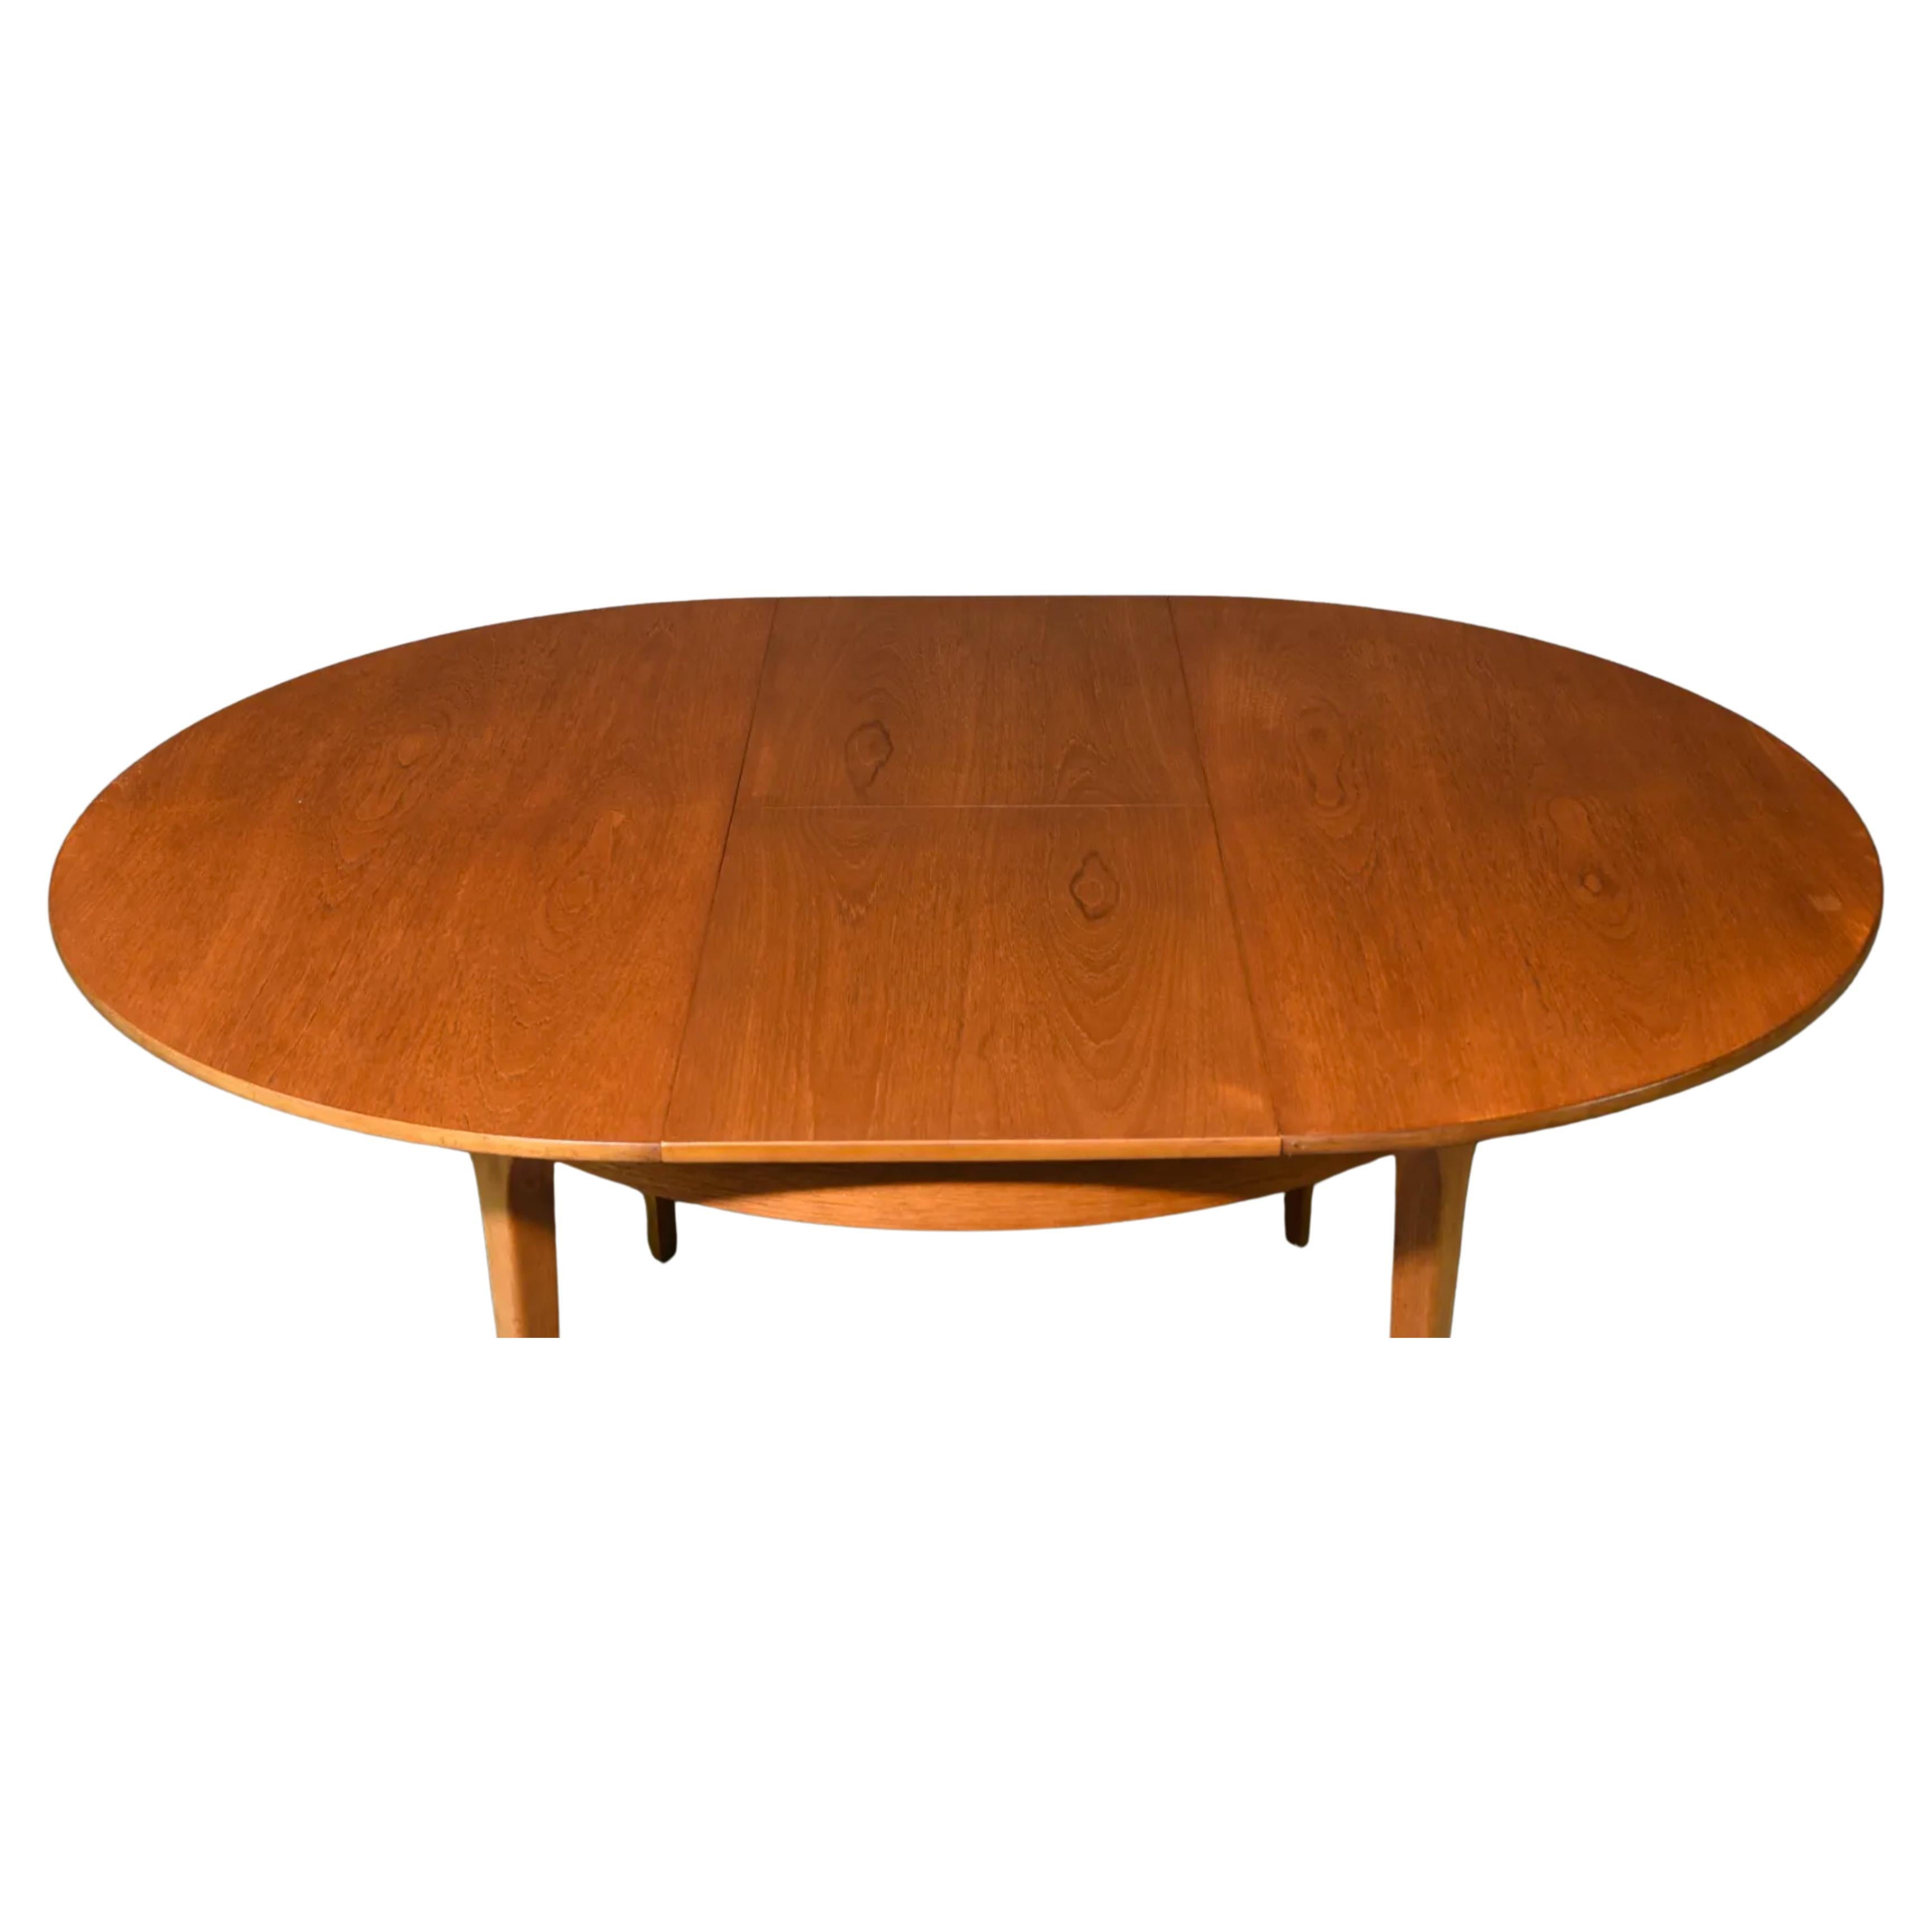 Woodwork Mid century Danish Modern round Teak dining table with (1) pop up leaf For Sale